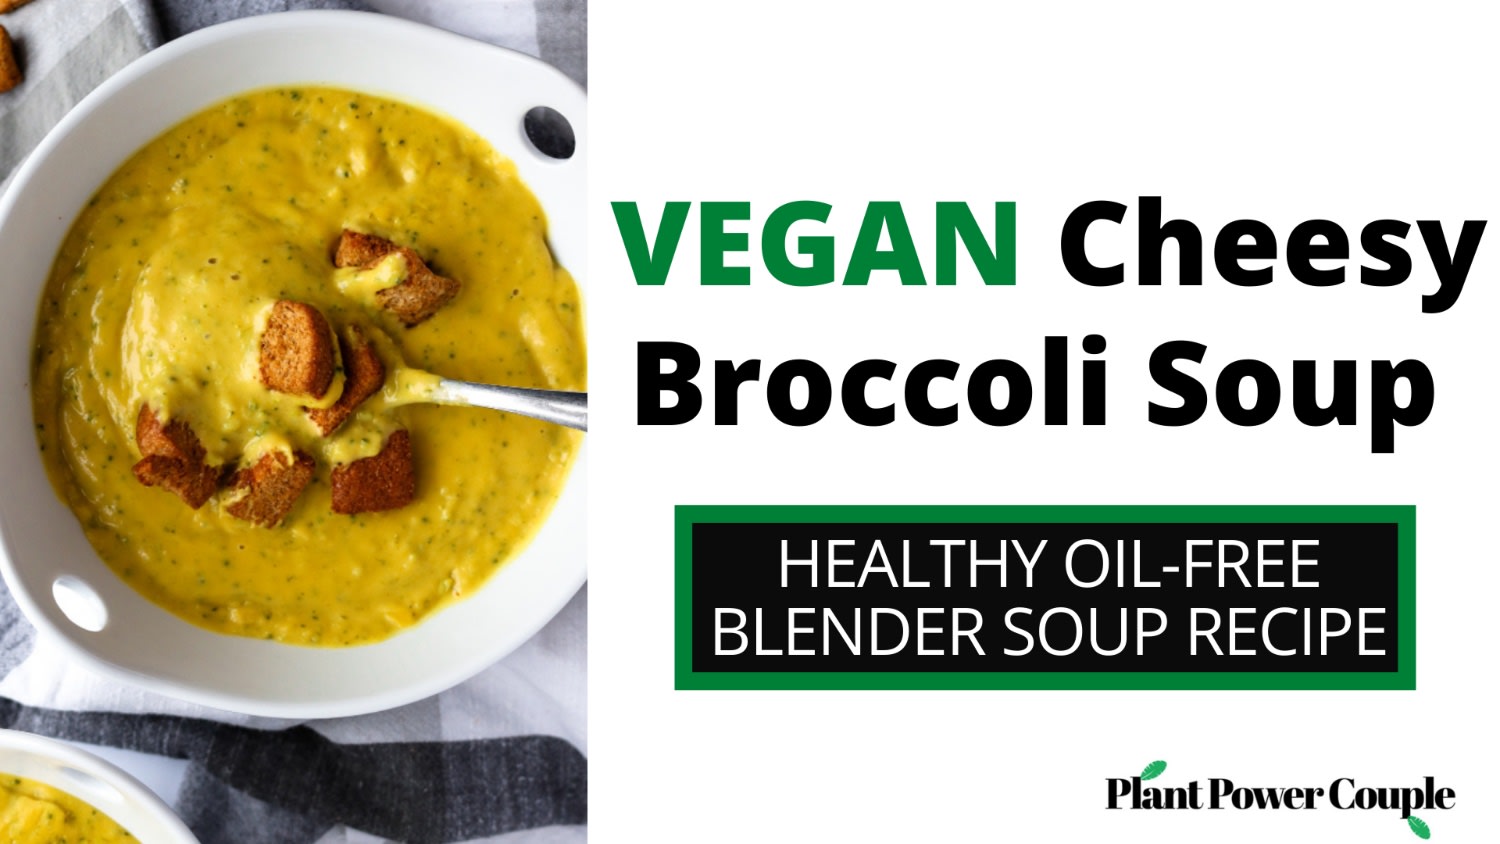 6-Minute Vegan Broccoli & Cheese Blender Soup (Froothie Recipe)